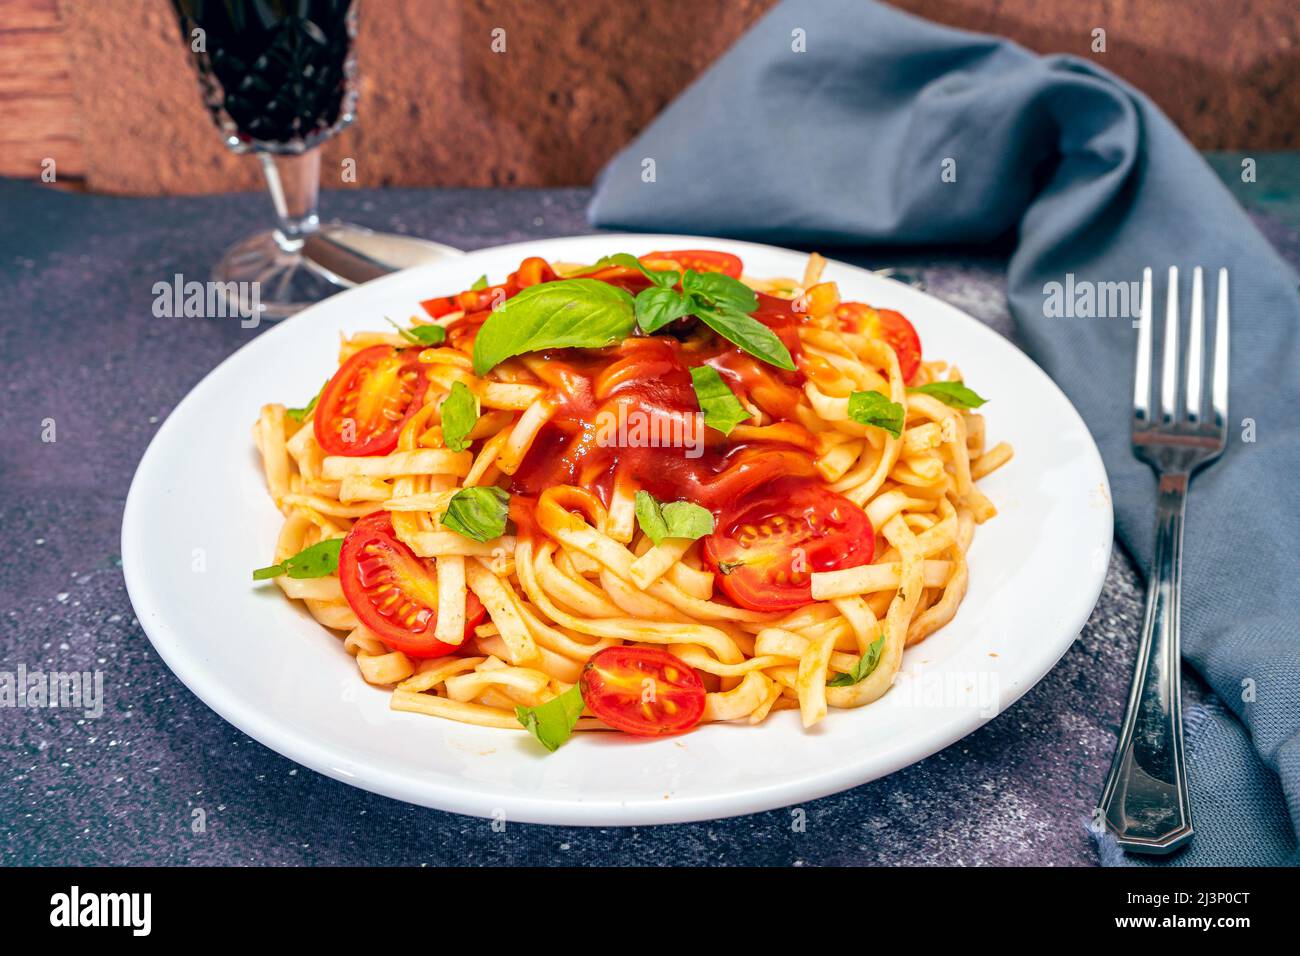 High view of a plate of spaghetti pasta with a delicious tomato sauce with homemade basil leaves. Homemade and natural food concept. Stock Photo